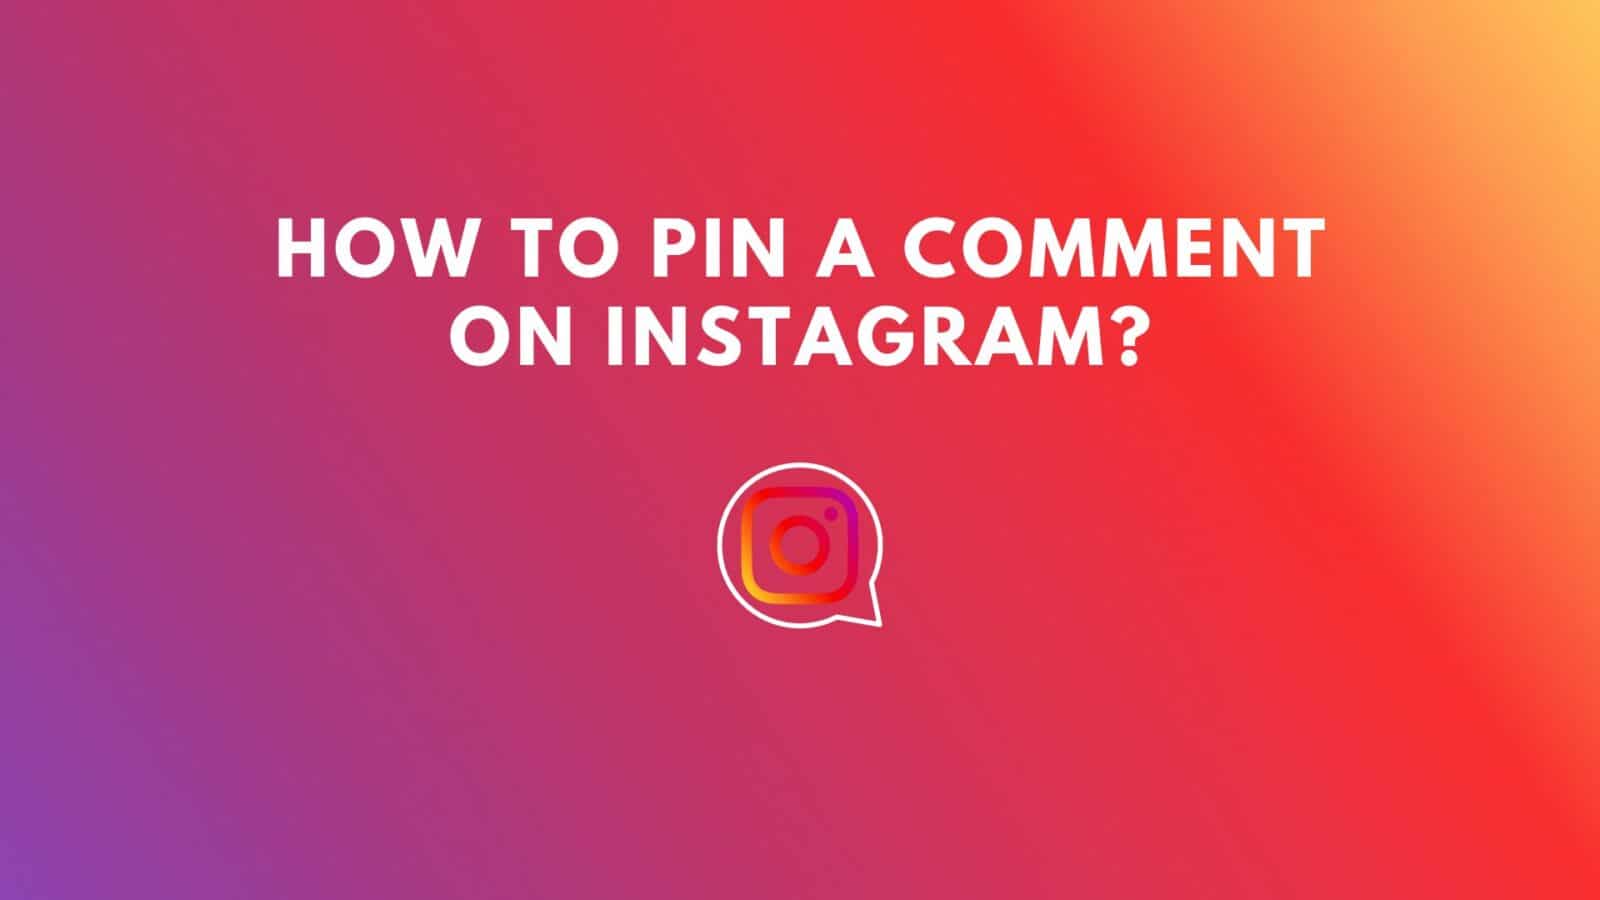 How to Pin a Comment on Instagram?